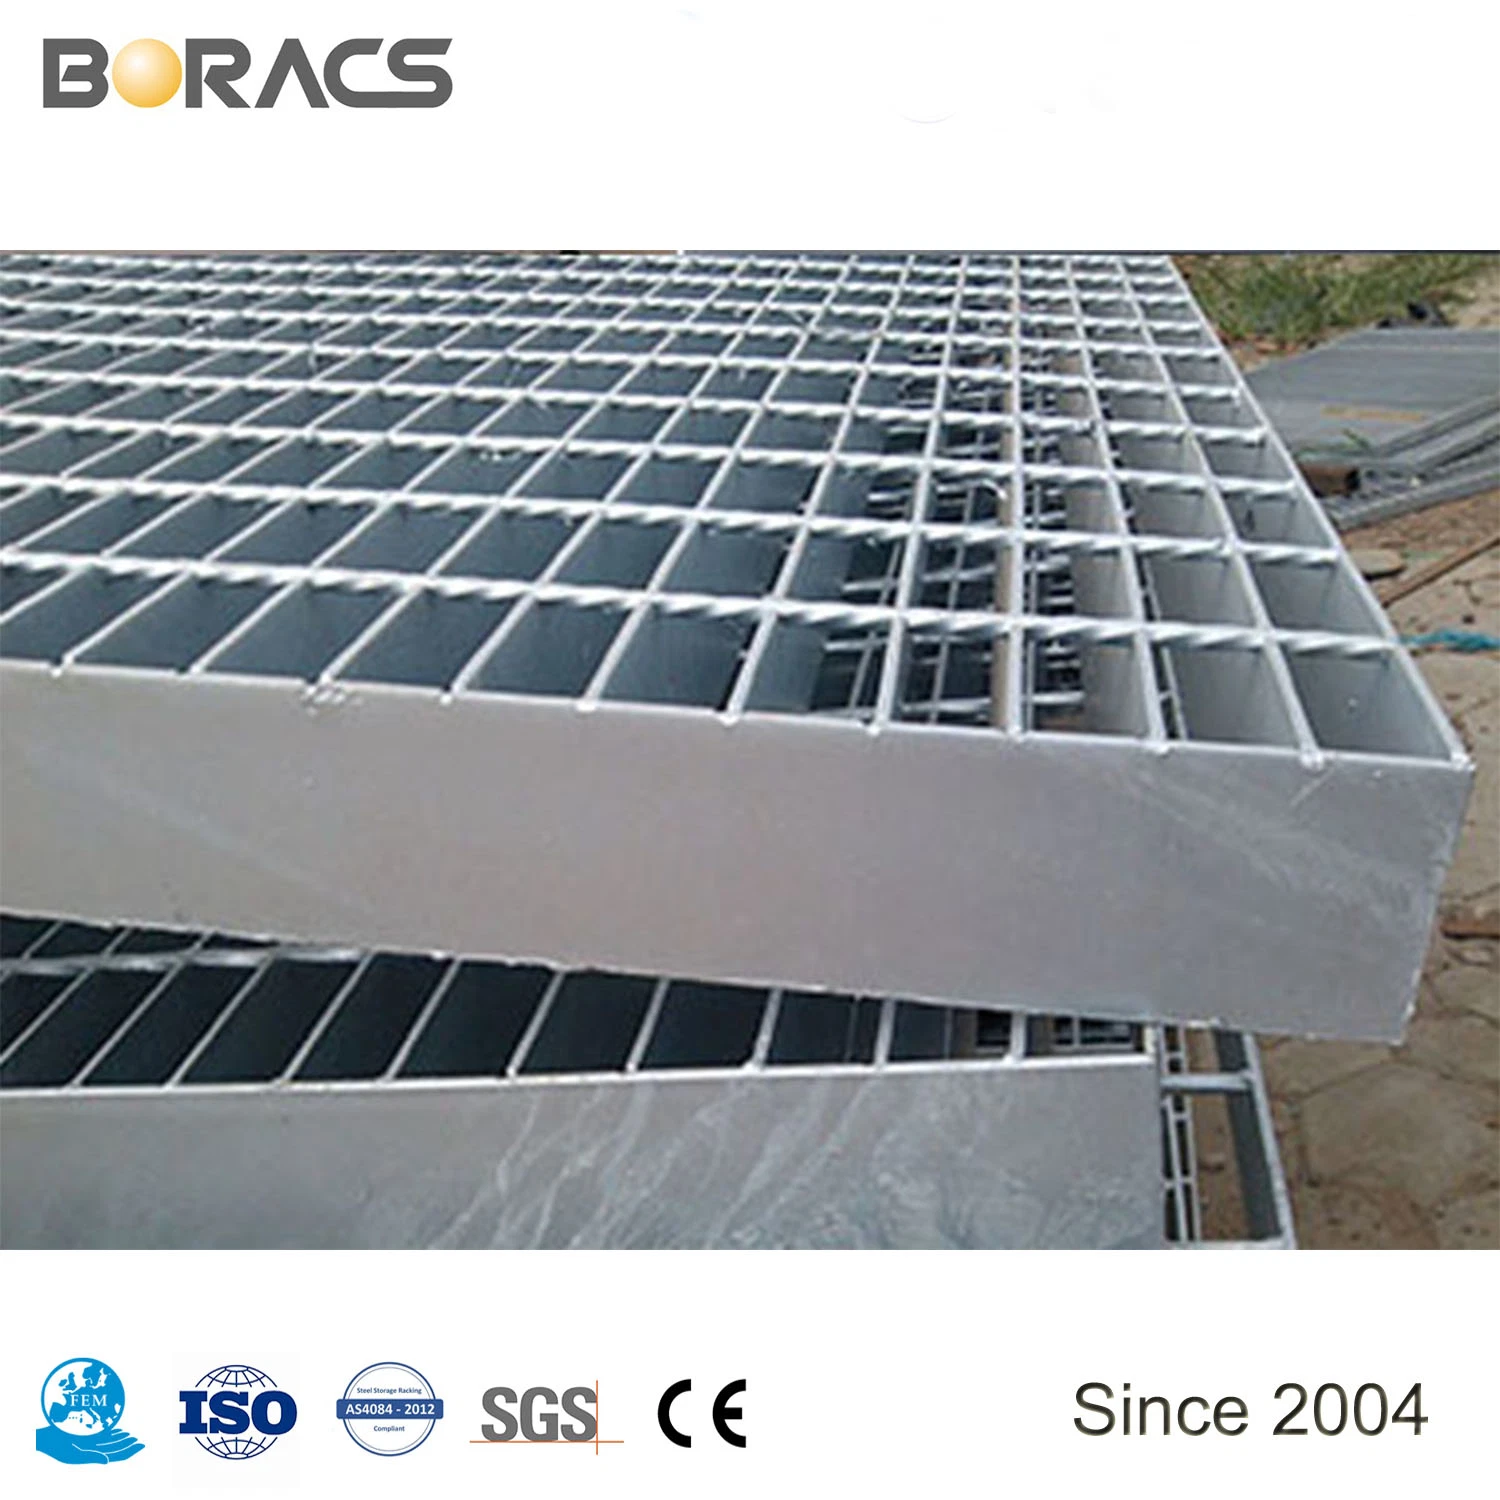 Heavy Duty Galvanized Steel Grating for Sump, Trench, Drainage Cover, Manhole Cover, Stair Tread, Floor Drain